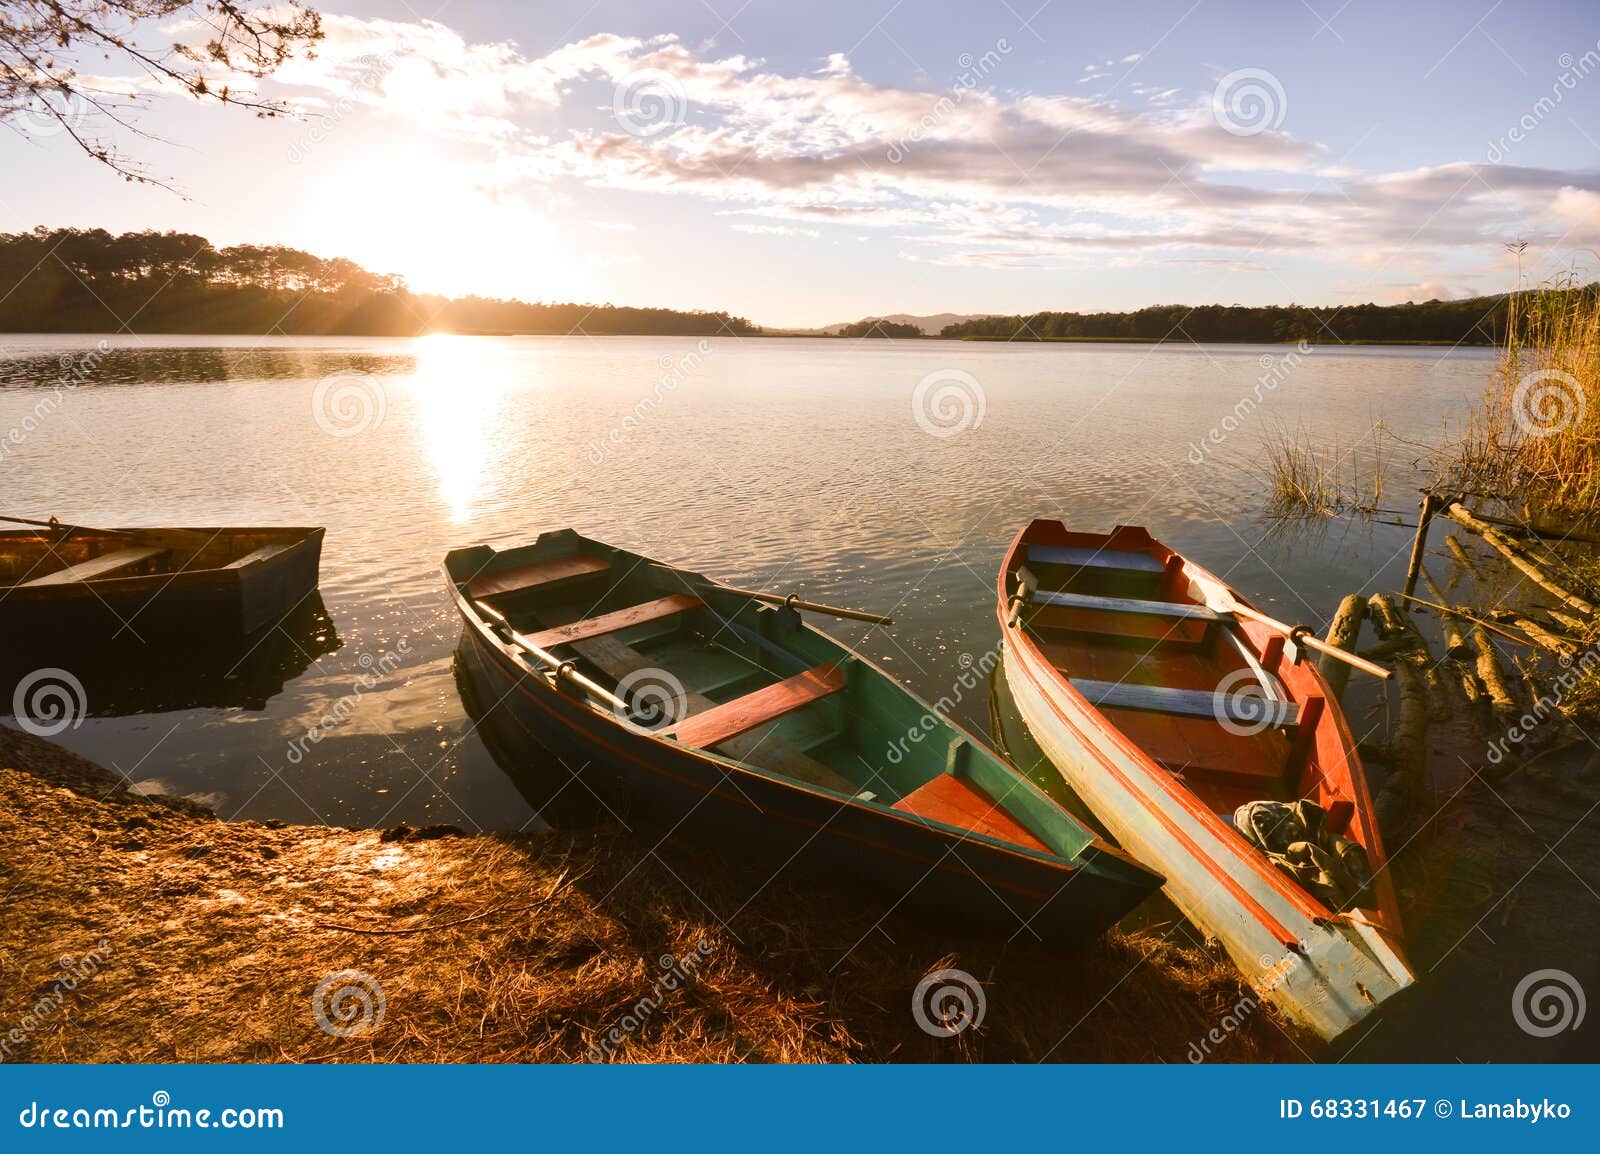 boats at sunset in the lagunas de montebello national park chia